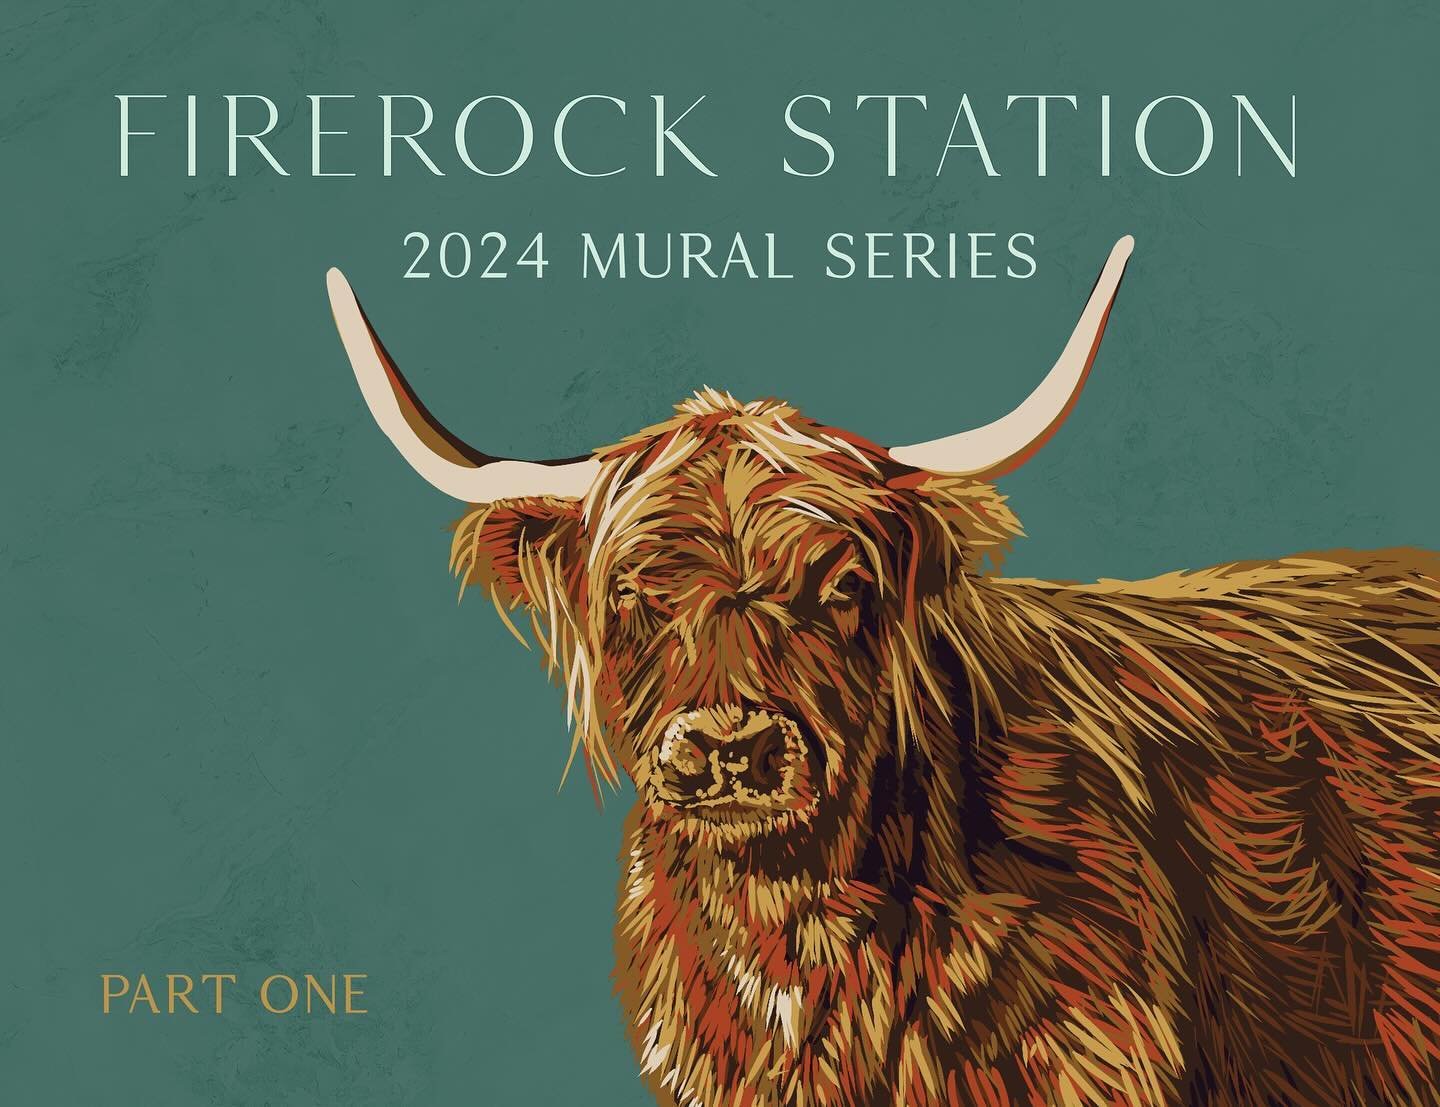 Just finished up this mural series for Firerock Station! 

The goal of this project was to revamp an area that was used for storage. My clients wanted a mural printed on a mesh banner surrounding the fence, as well as a simple logo mural on a shippin